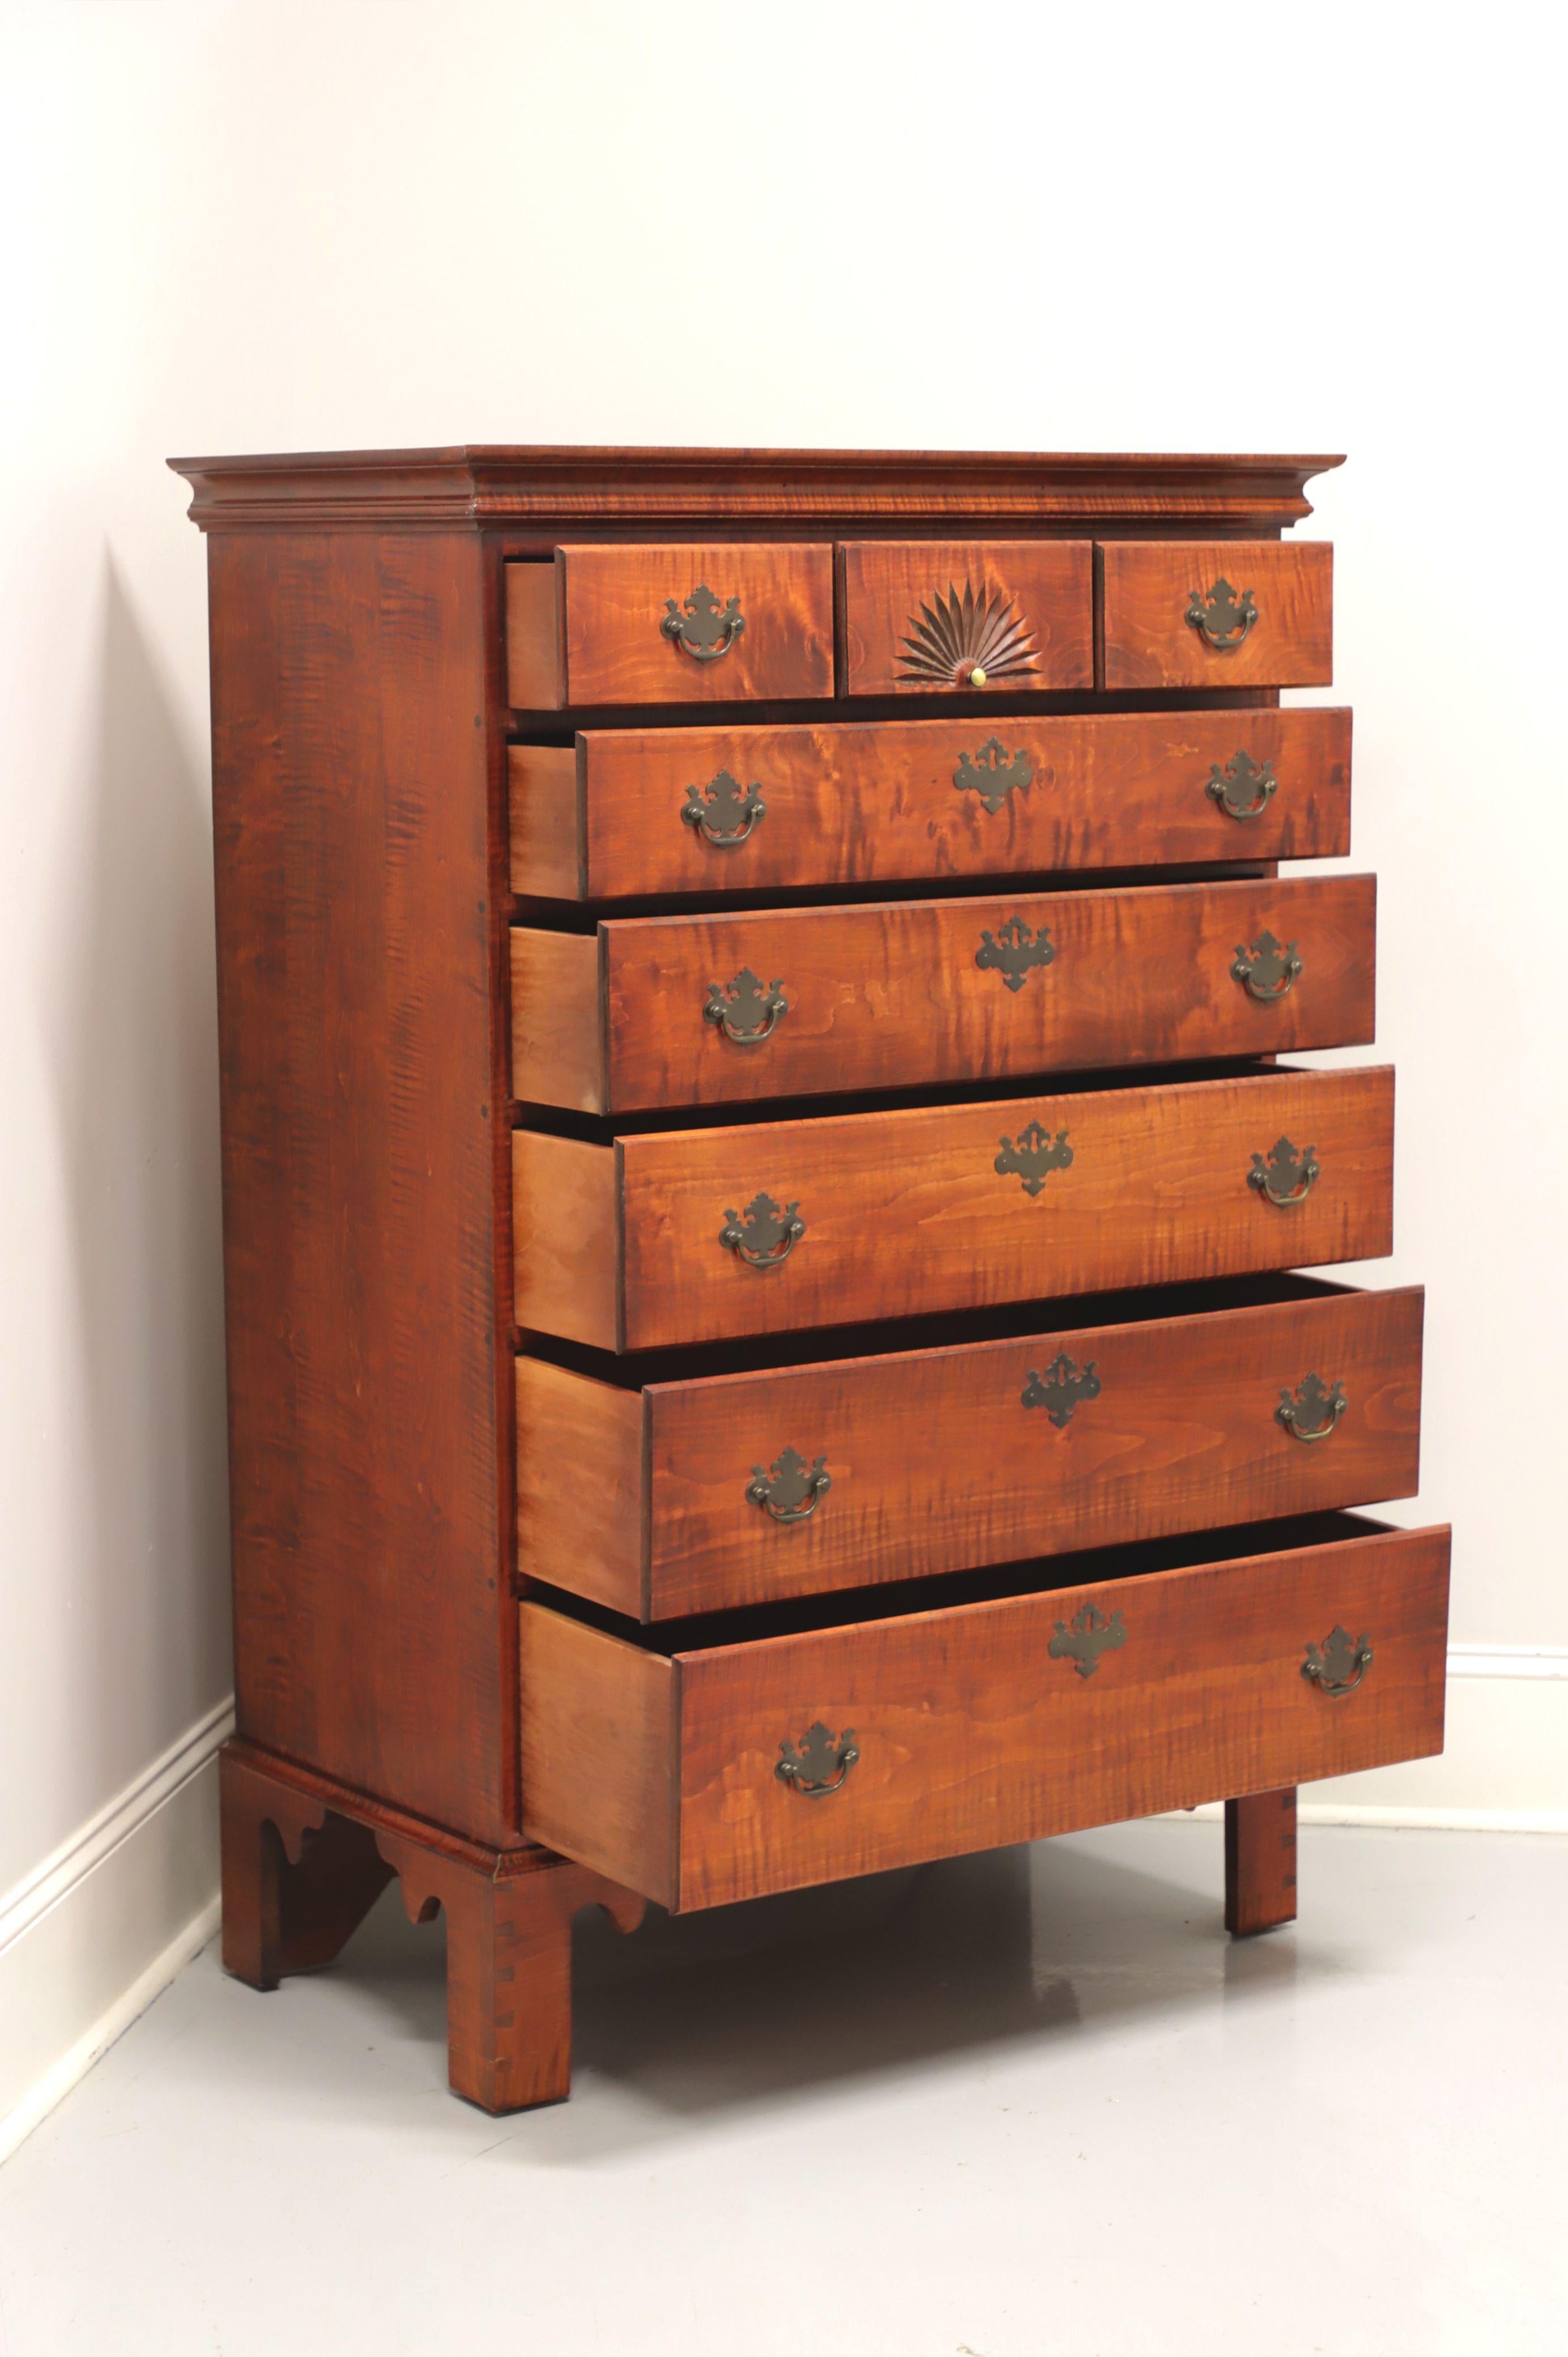 20th Century JL TREHARN Tiger Maple Chippendale Style Tall Chest of Drawers